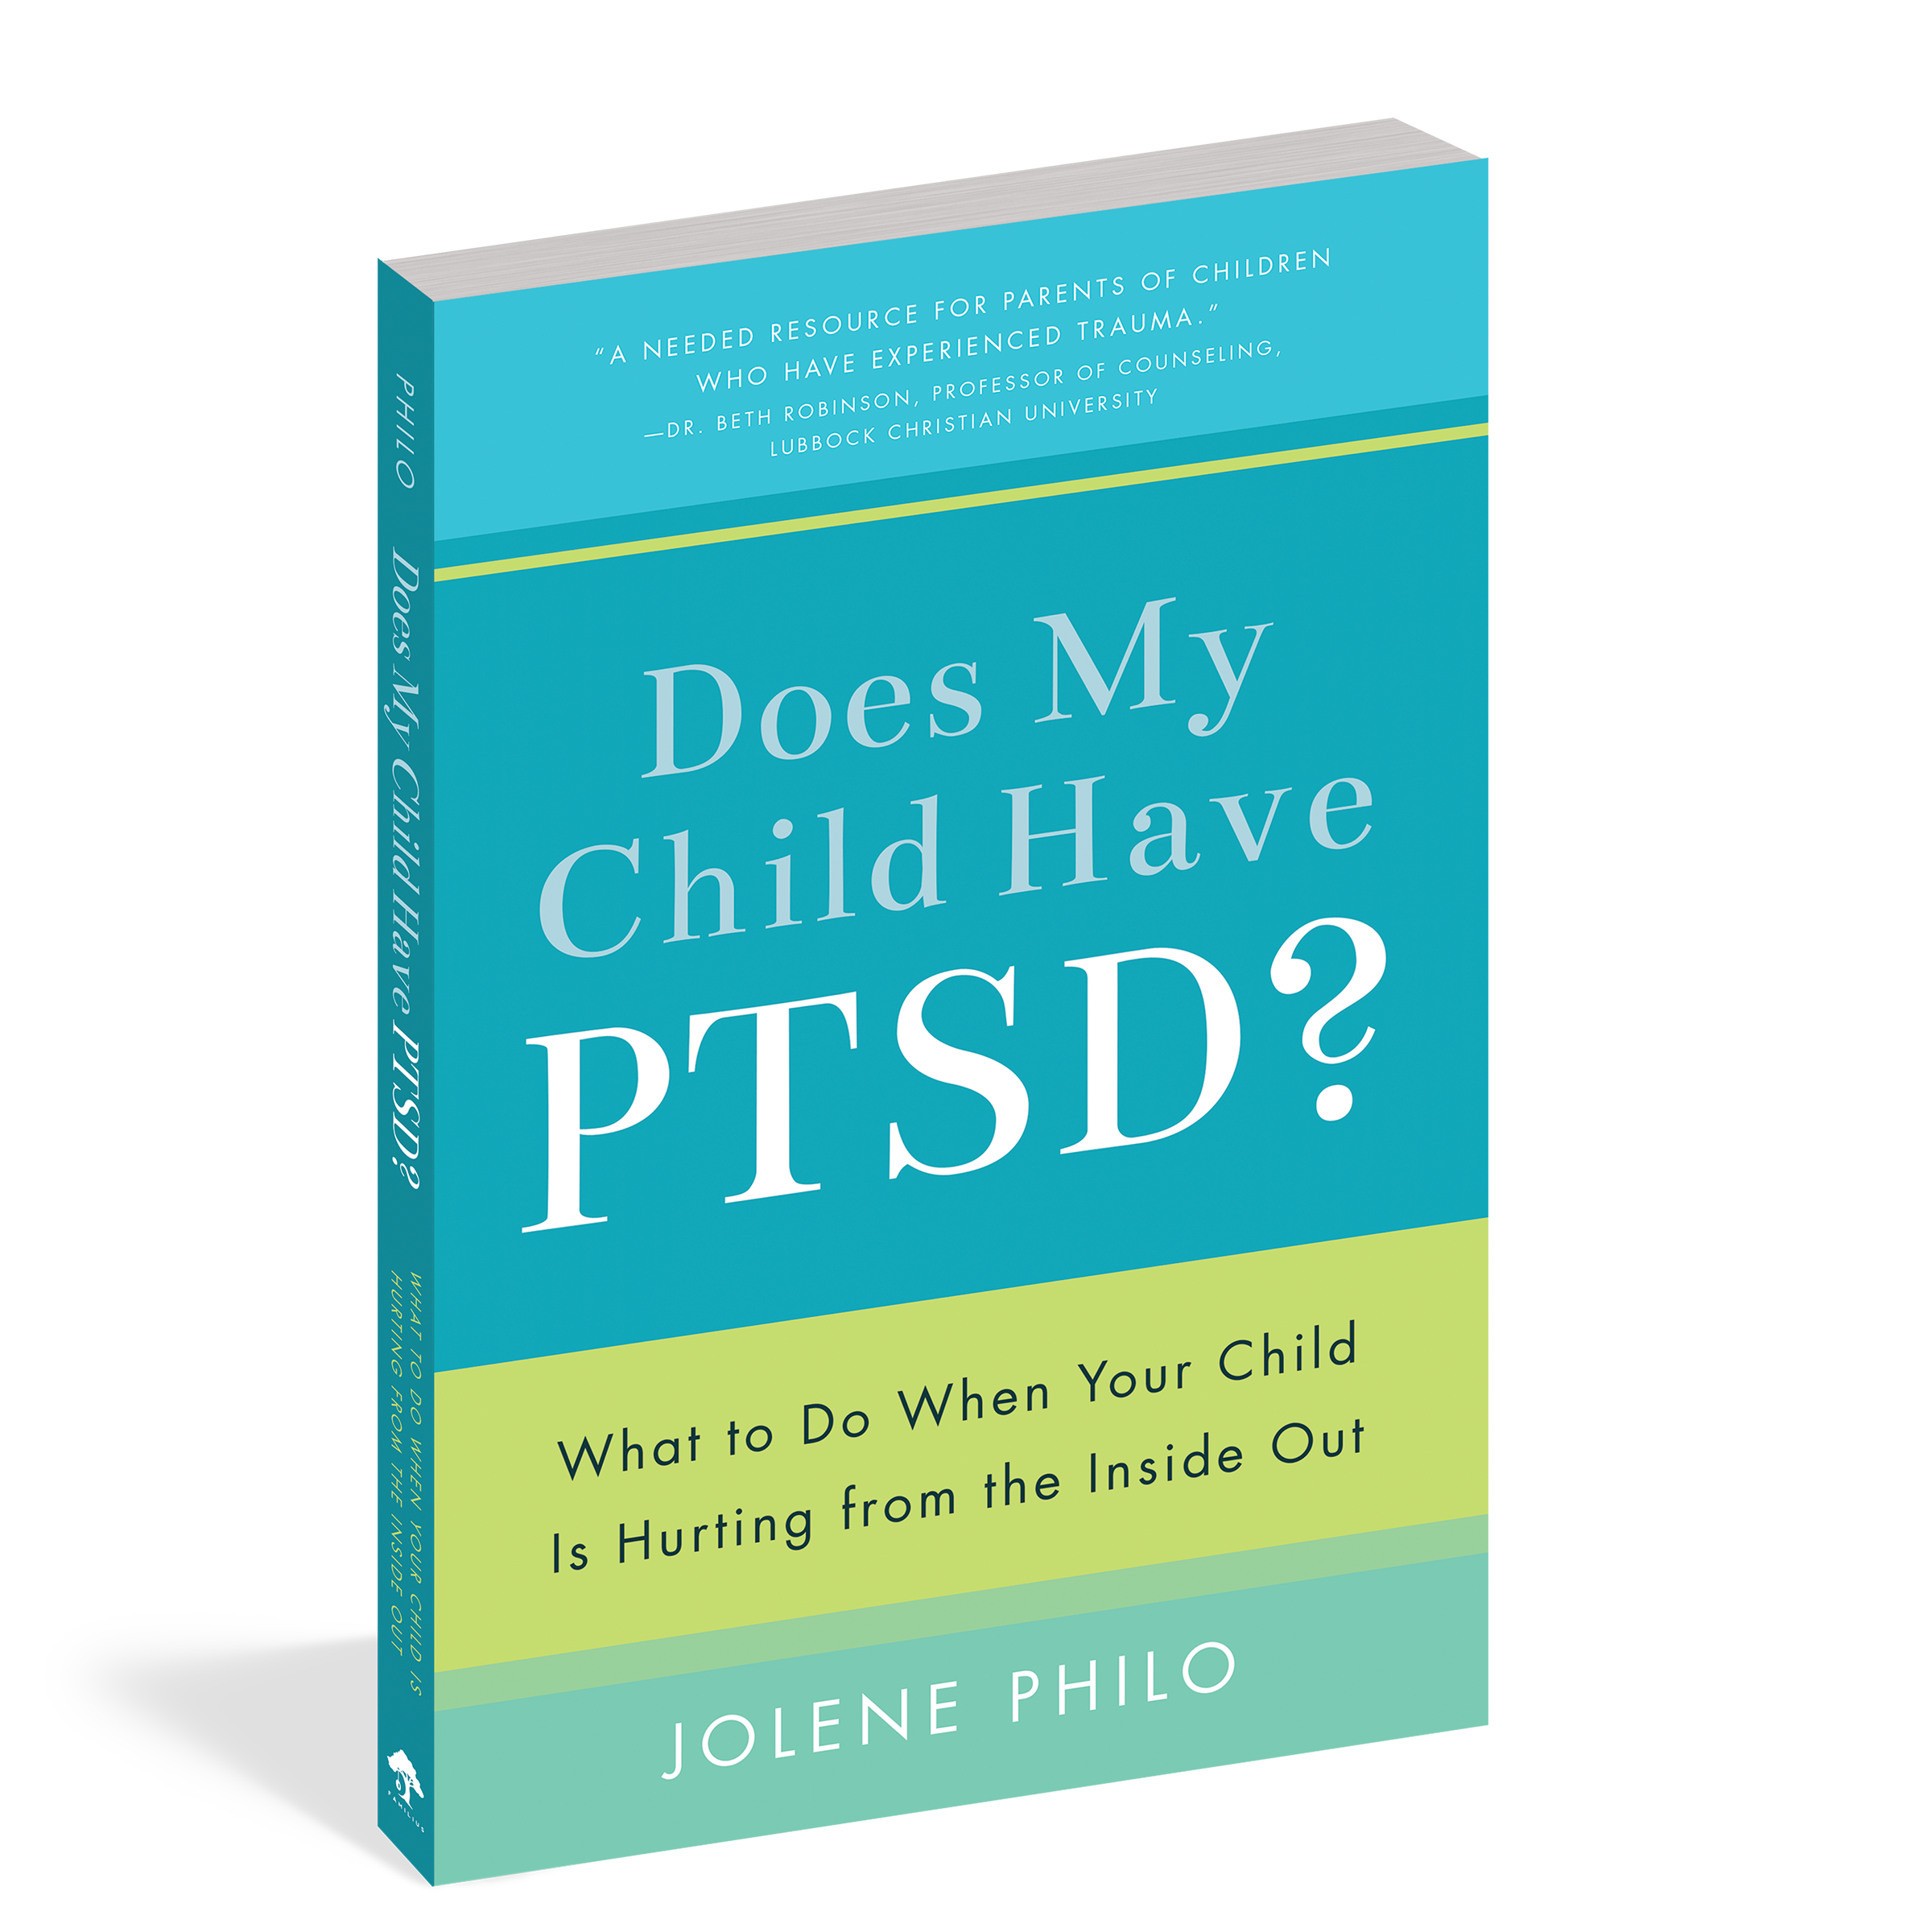 The cover of the book Does My Child Have PTSD?